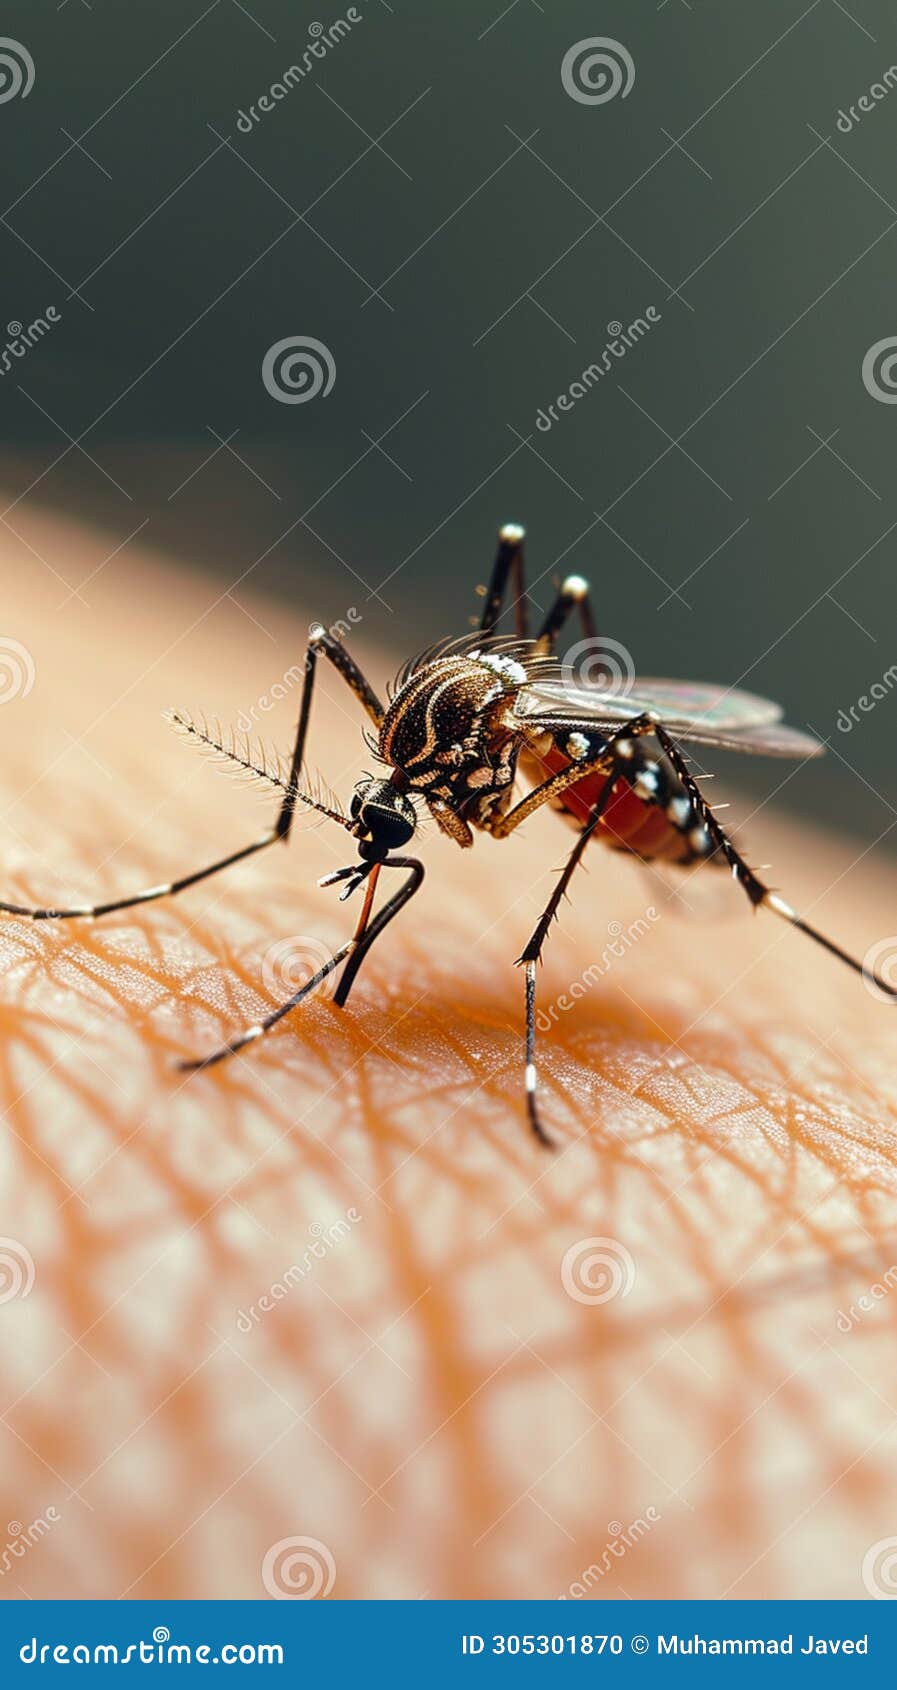 mosquito on human skin, a close up capturing a common annoyance